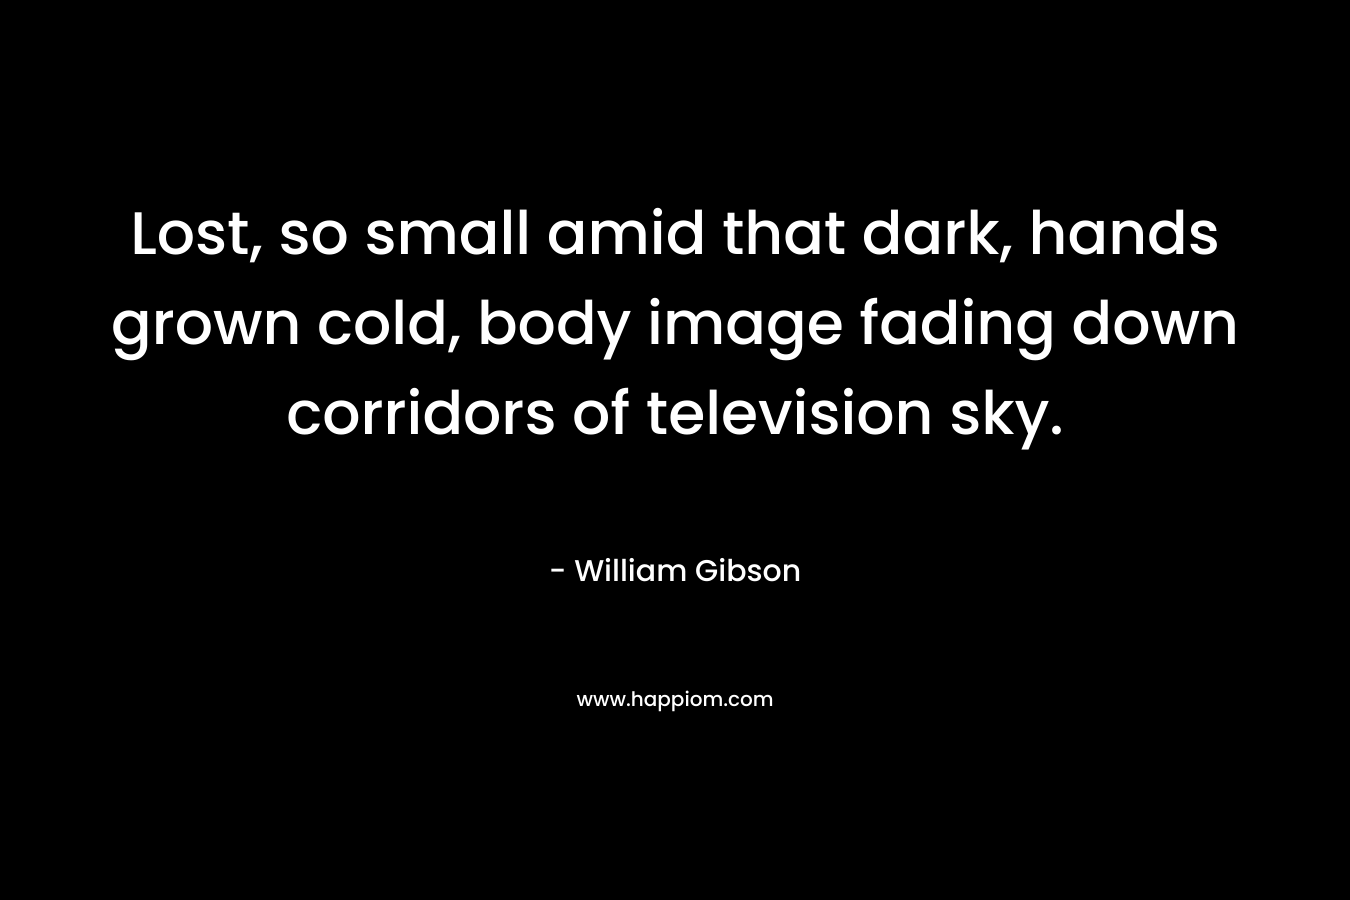 Lost, so small amid that dark, hands grown cold, body image fading down corridors of television sky.